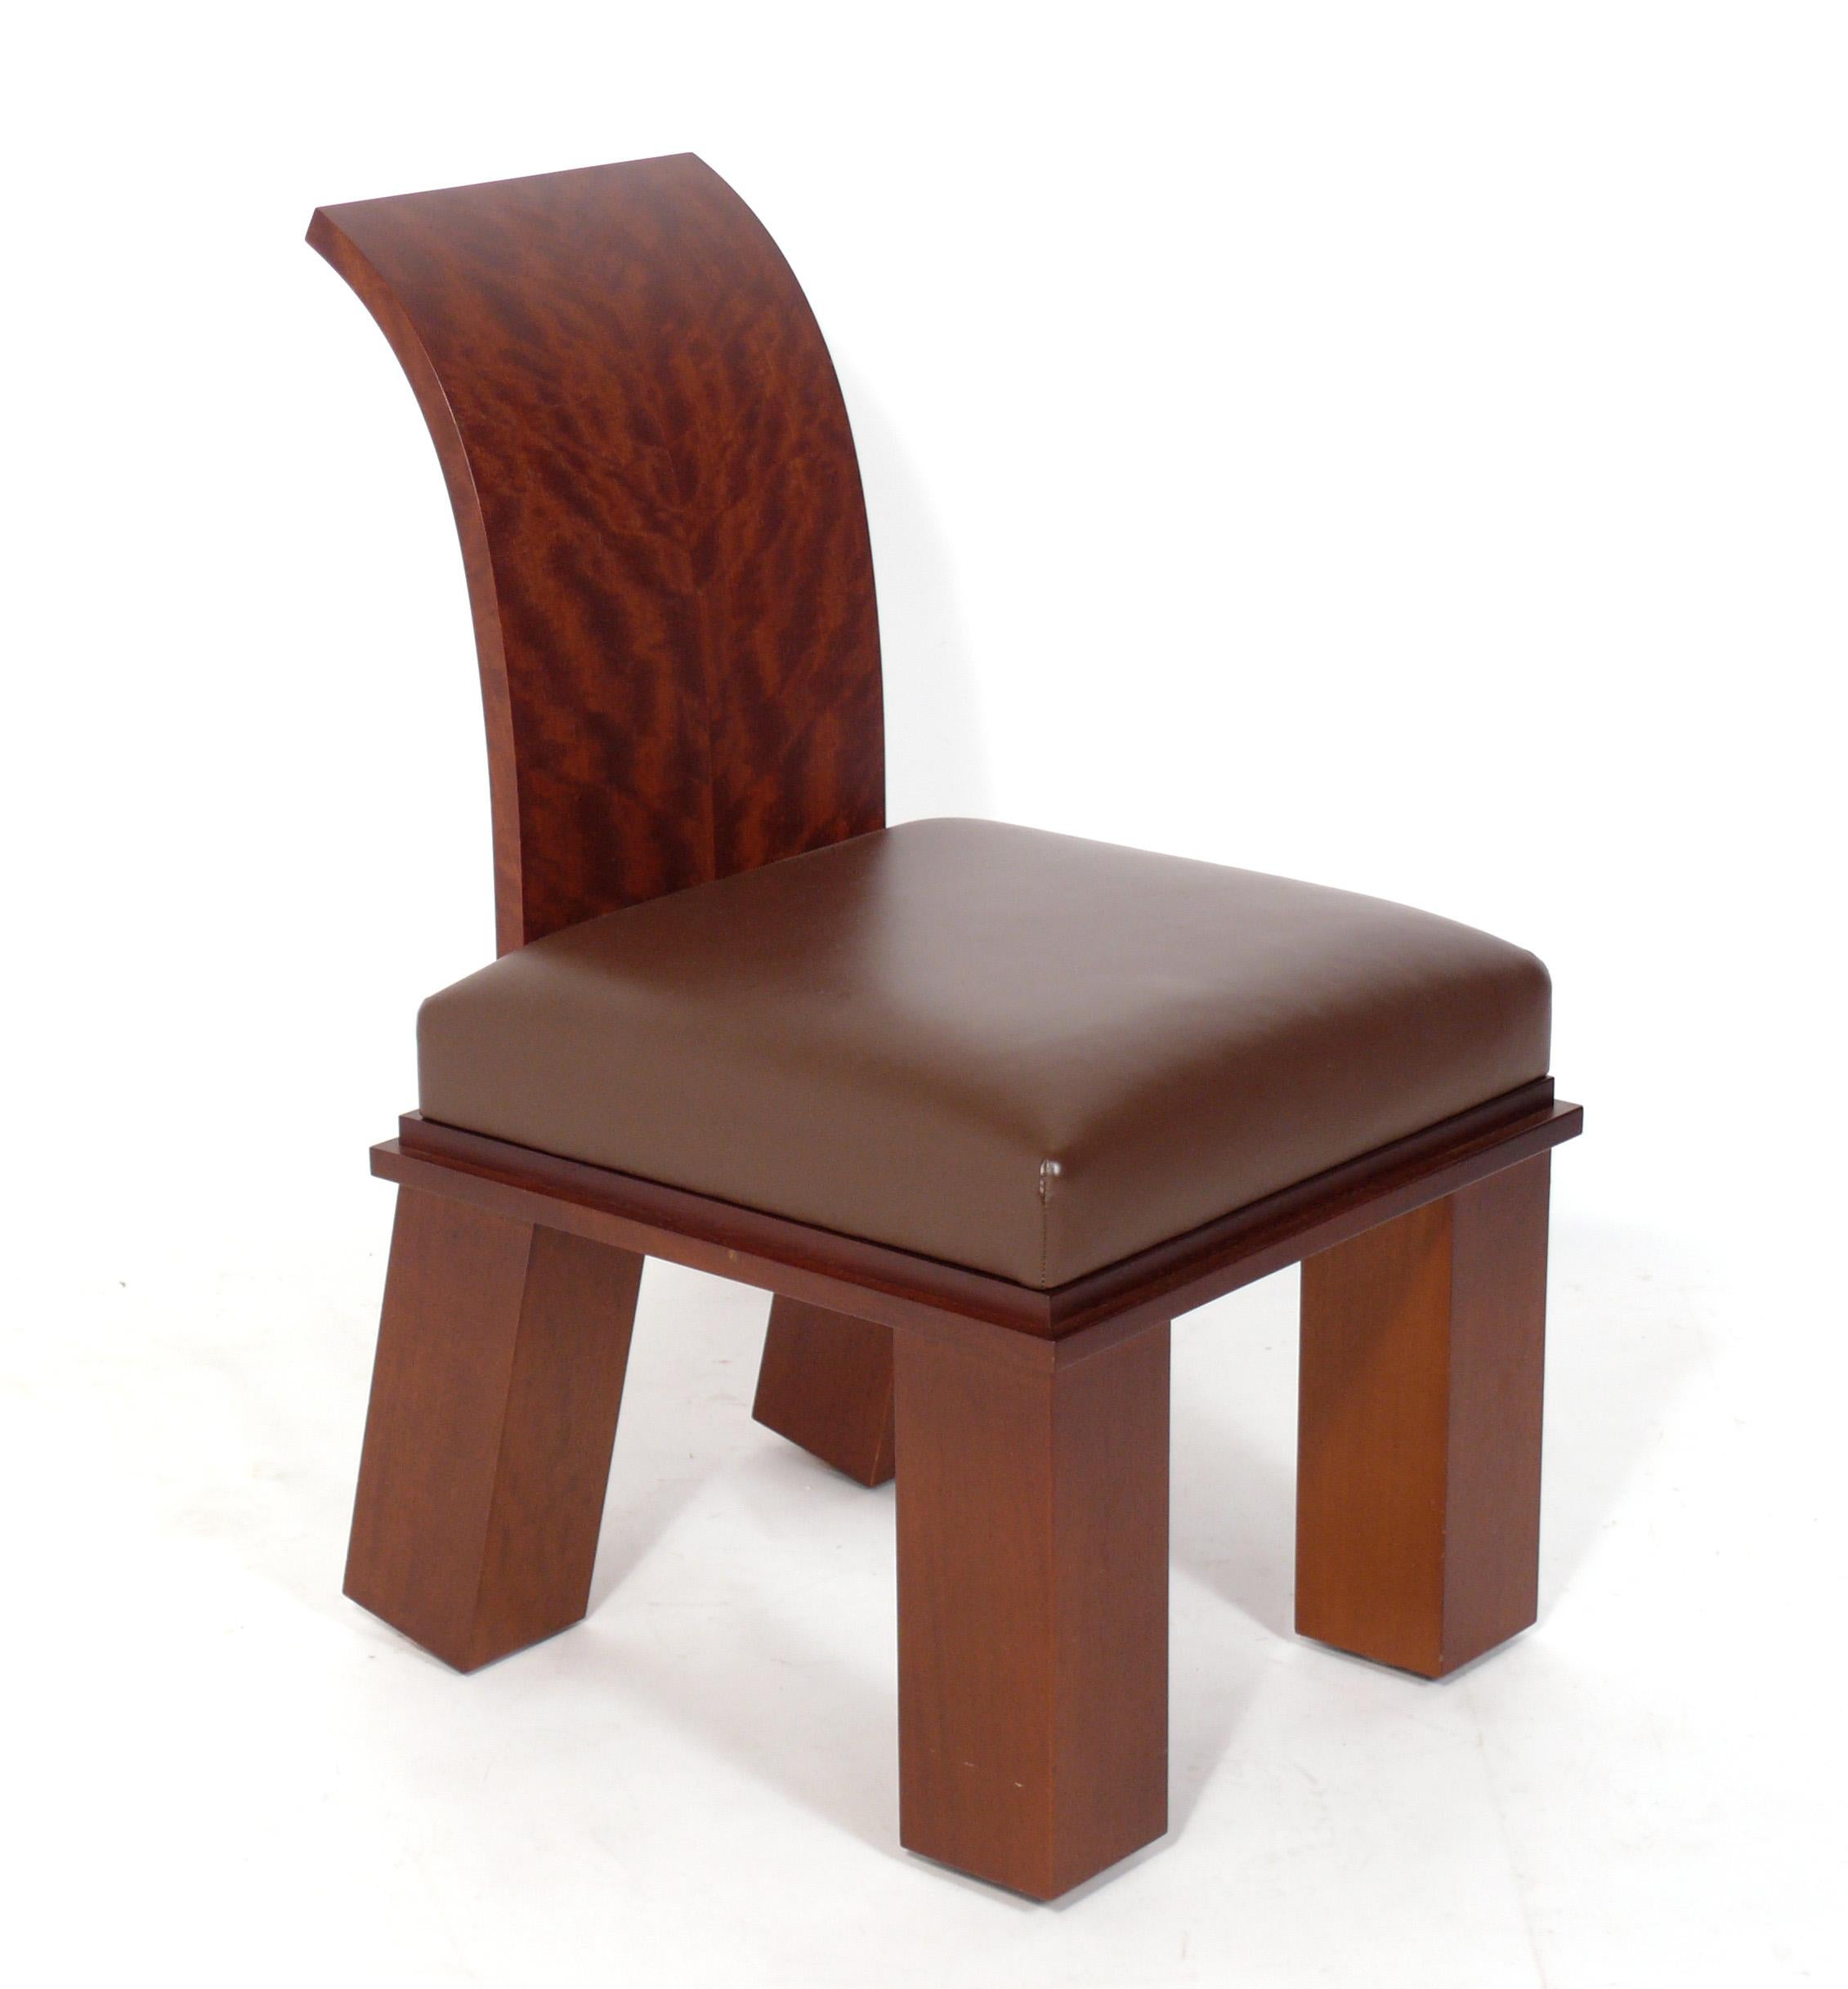 Set of eight sculptural dining chairs, designed by Wendell Castle, American, circa 2010s. Signed with Wendell Castle's branded monogram on the leg. Wendell Castle licensed several of his designs for the Wendell Castle Collection including these